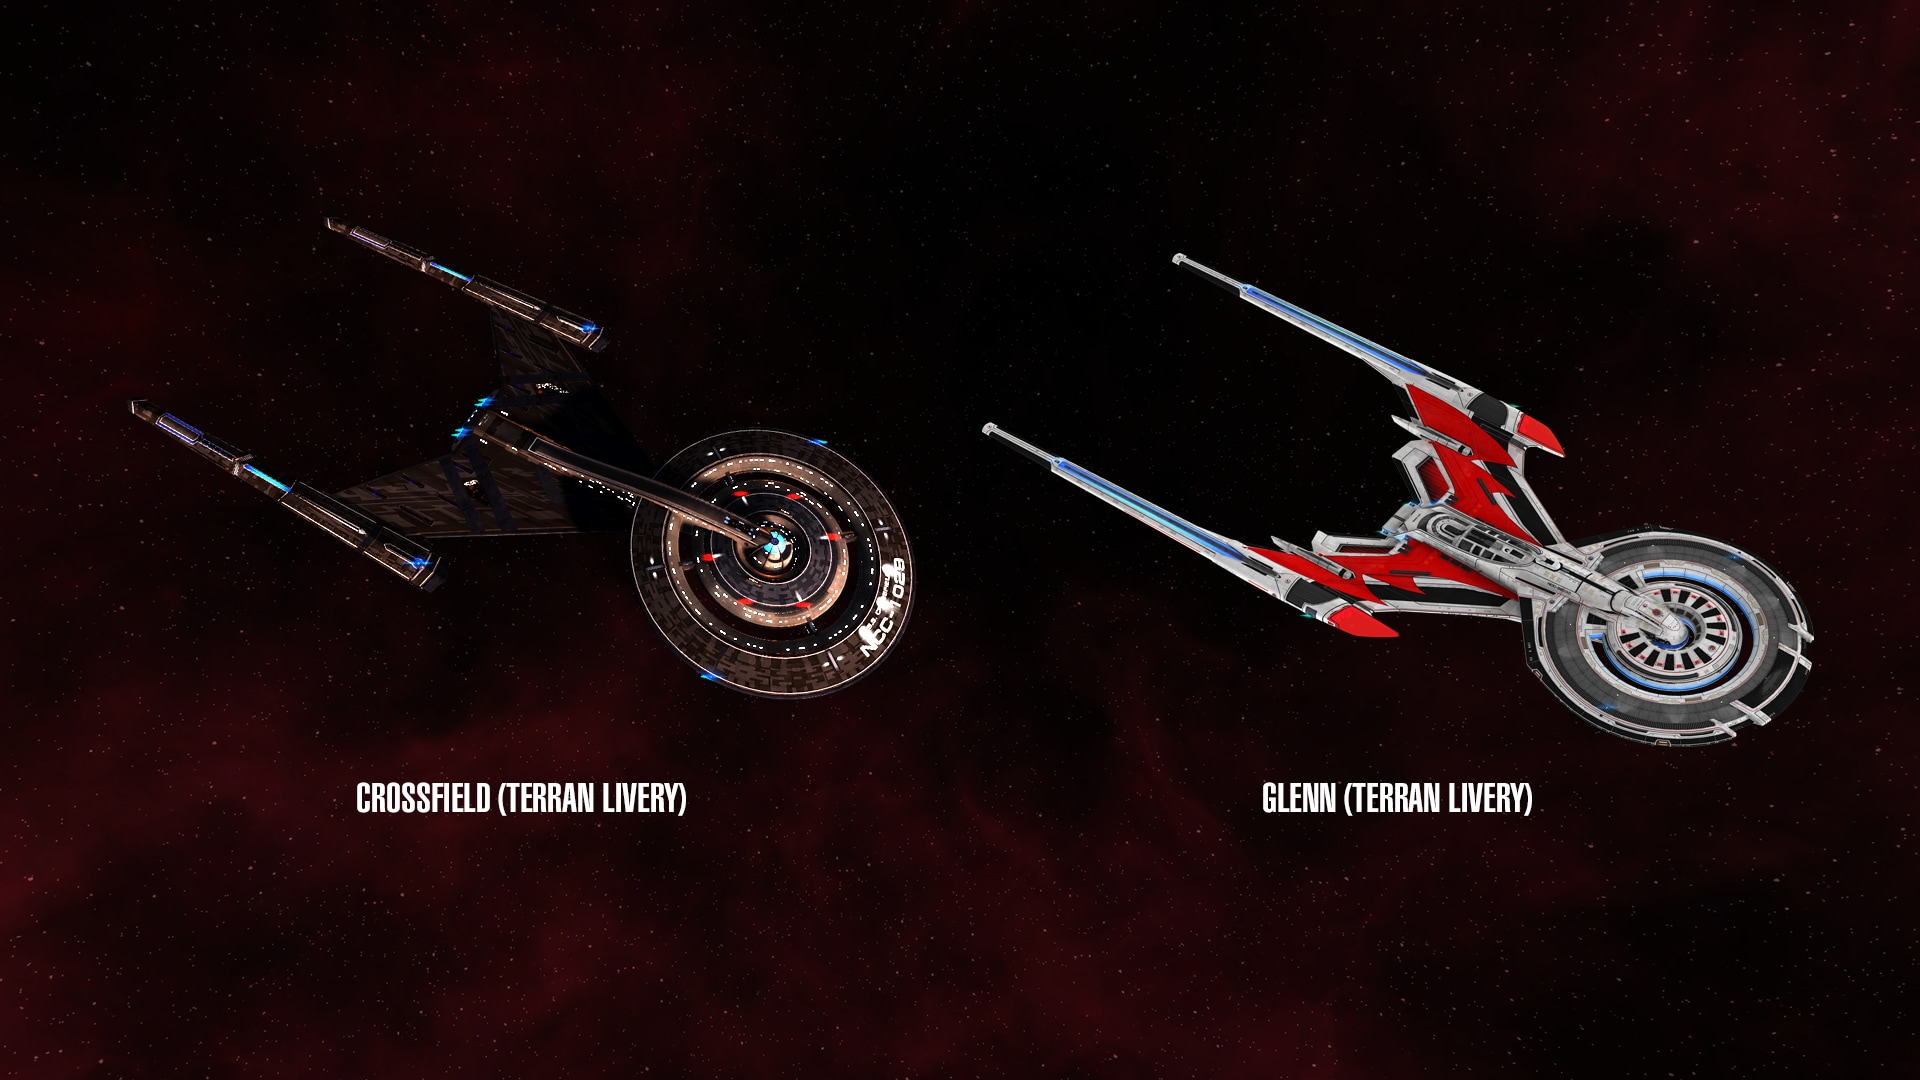 science - Legendary Temporal Operative Science Vessel - spécifications 6e1bc1cba3a979ce66962f405555be4a1676089495